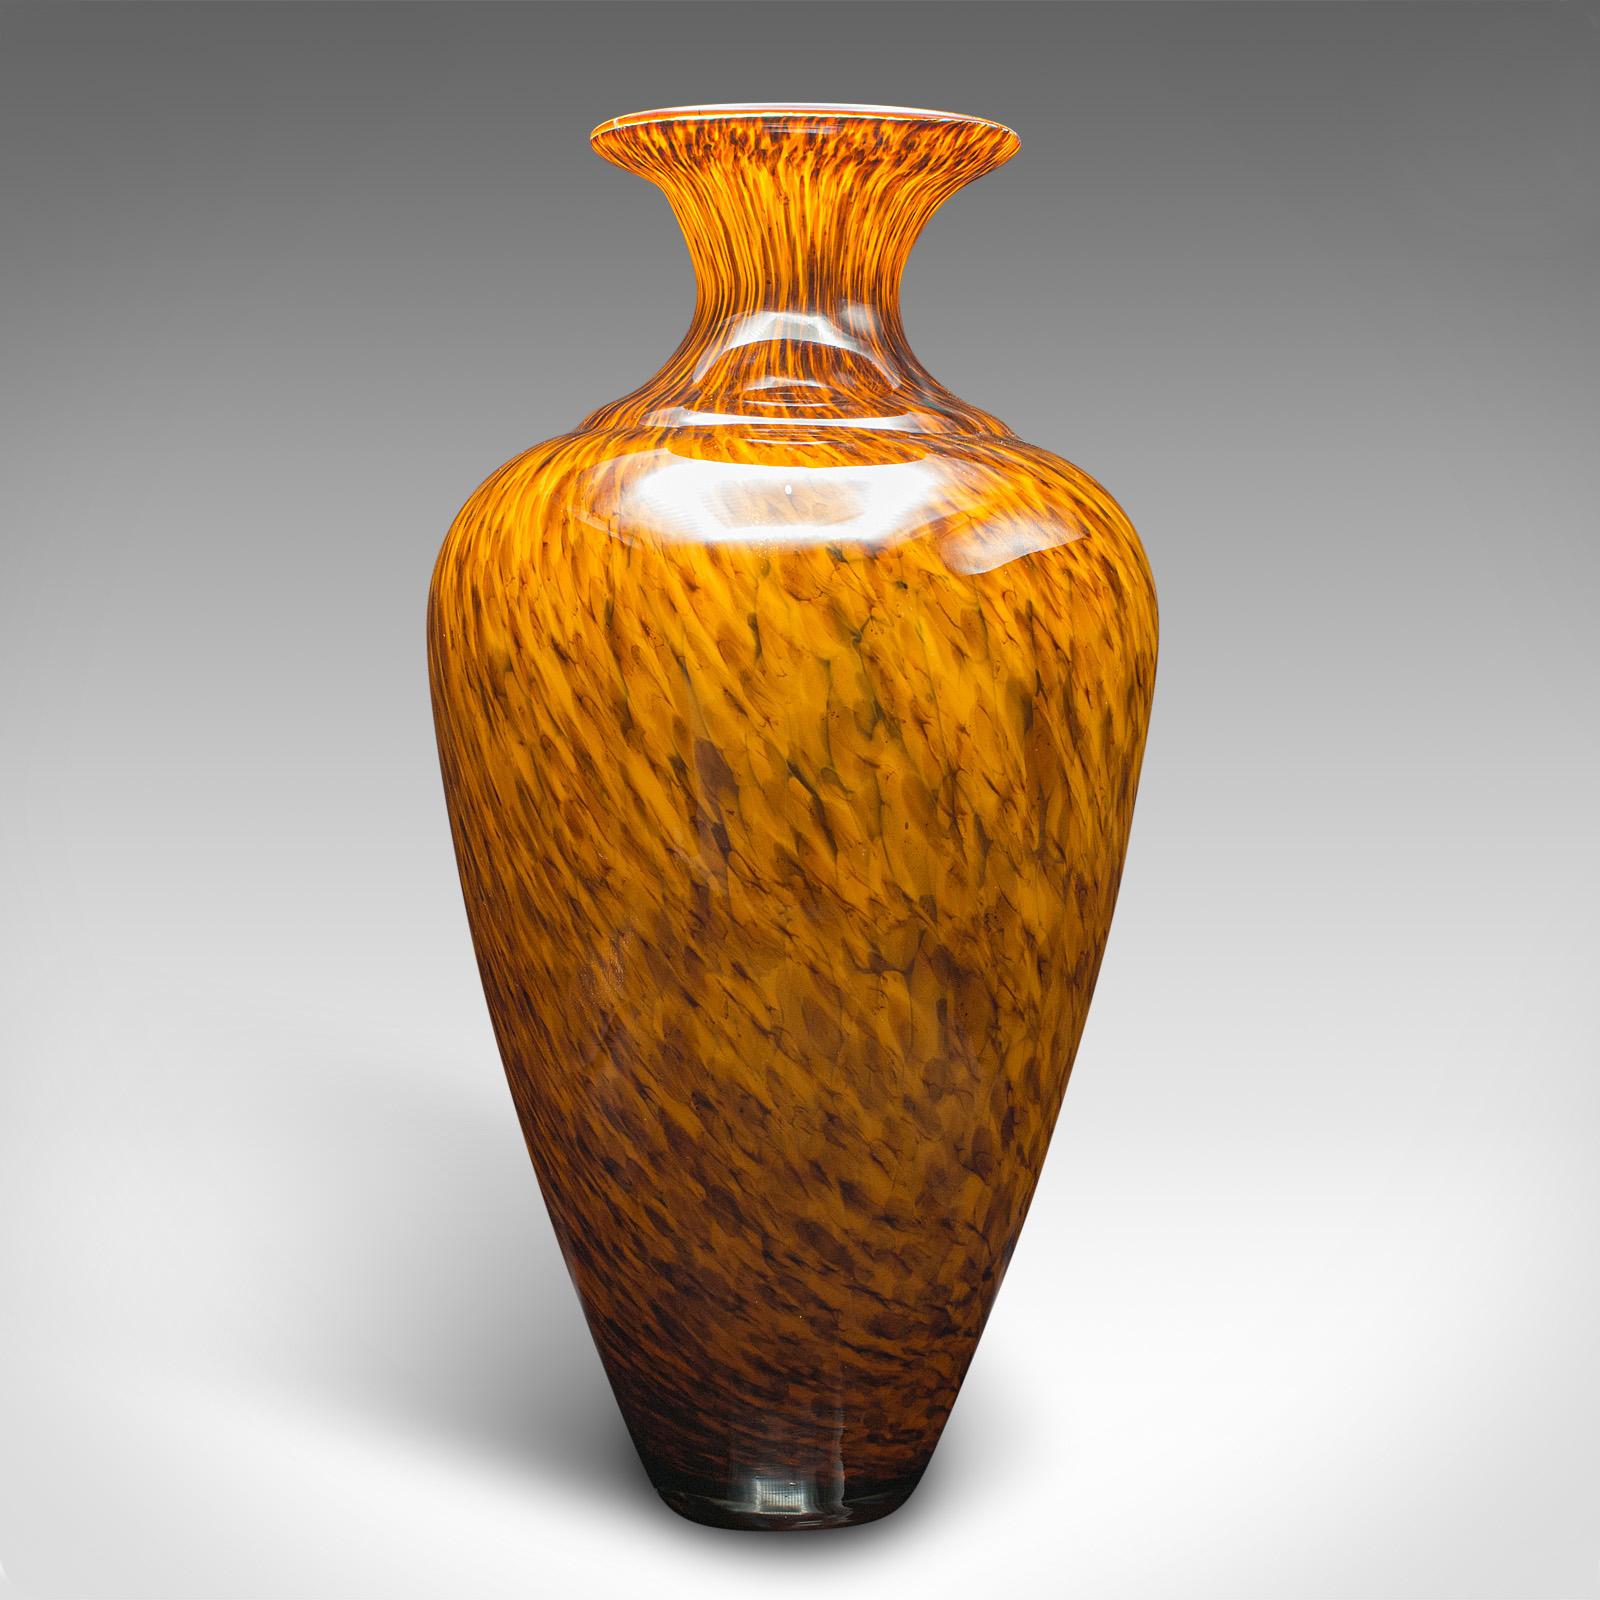 This is a large vintage Murano tiger pattern vase. An Italian, art glass table or floorstanding urn, dating to the mid 20th century, circa 1960.

Wonderfully colourful with a distinctive finish and great proportion
Displays a desirable aged patina